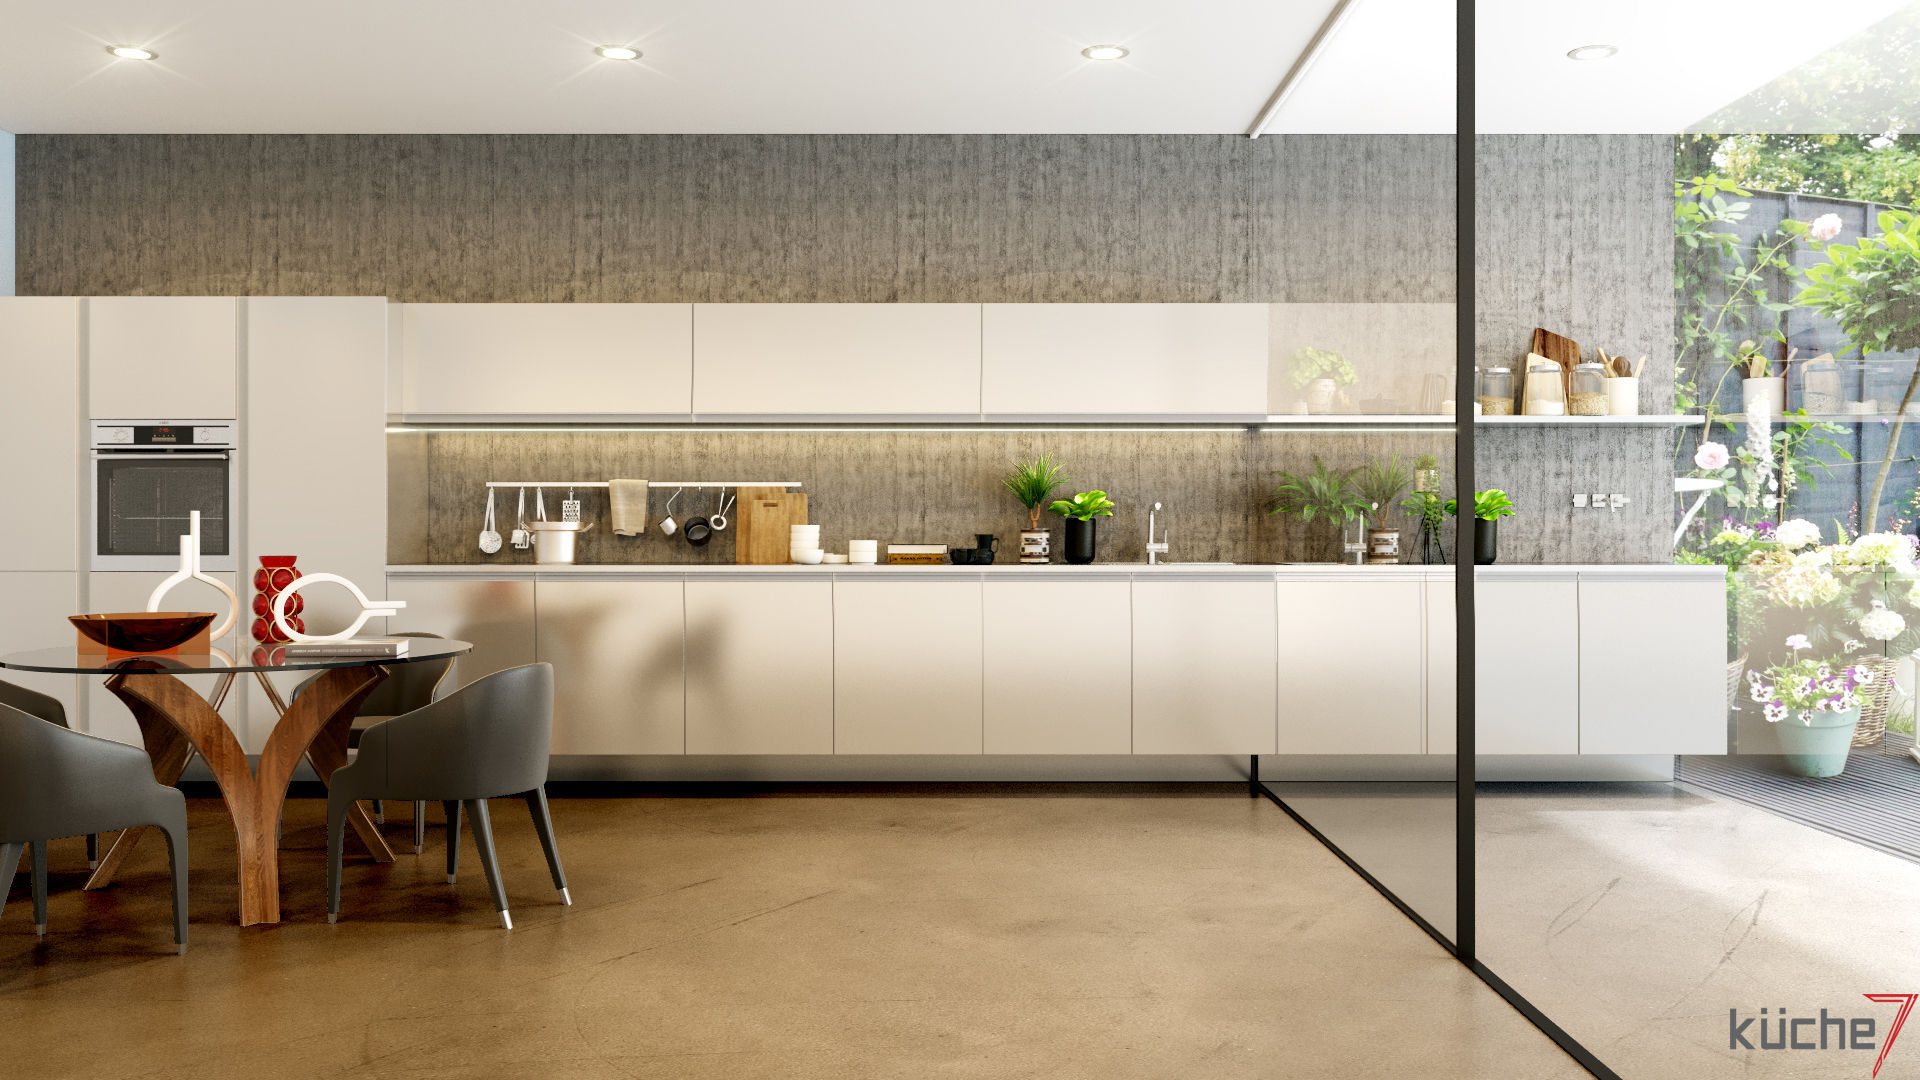 Luxury kitchens that outclasses all other kitchens you've seen, Küche7 Küche7 Dapur built in